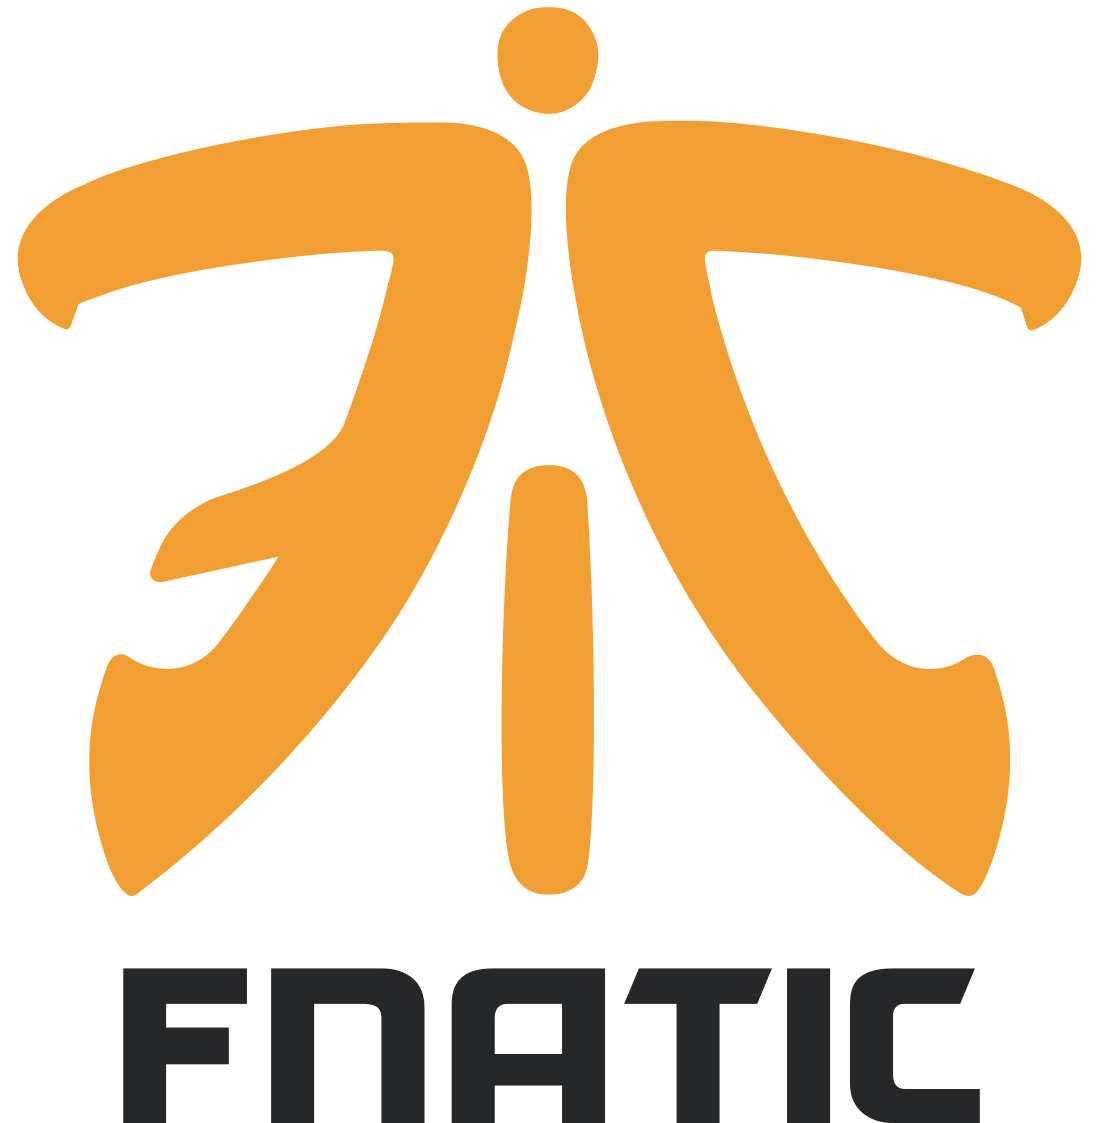 Fnatic.png - Fnatic, Transparent background PNG HD thumbnail